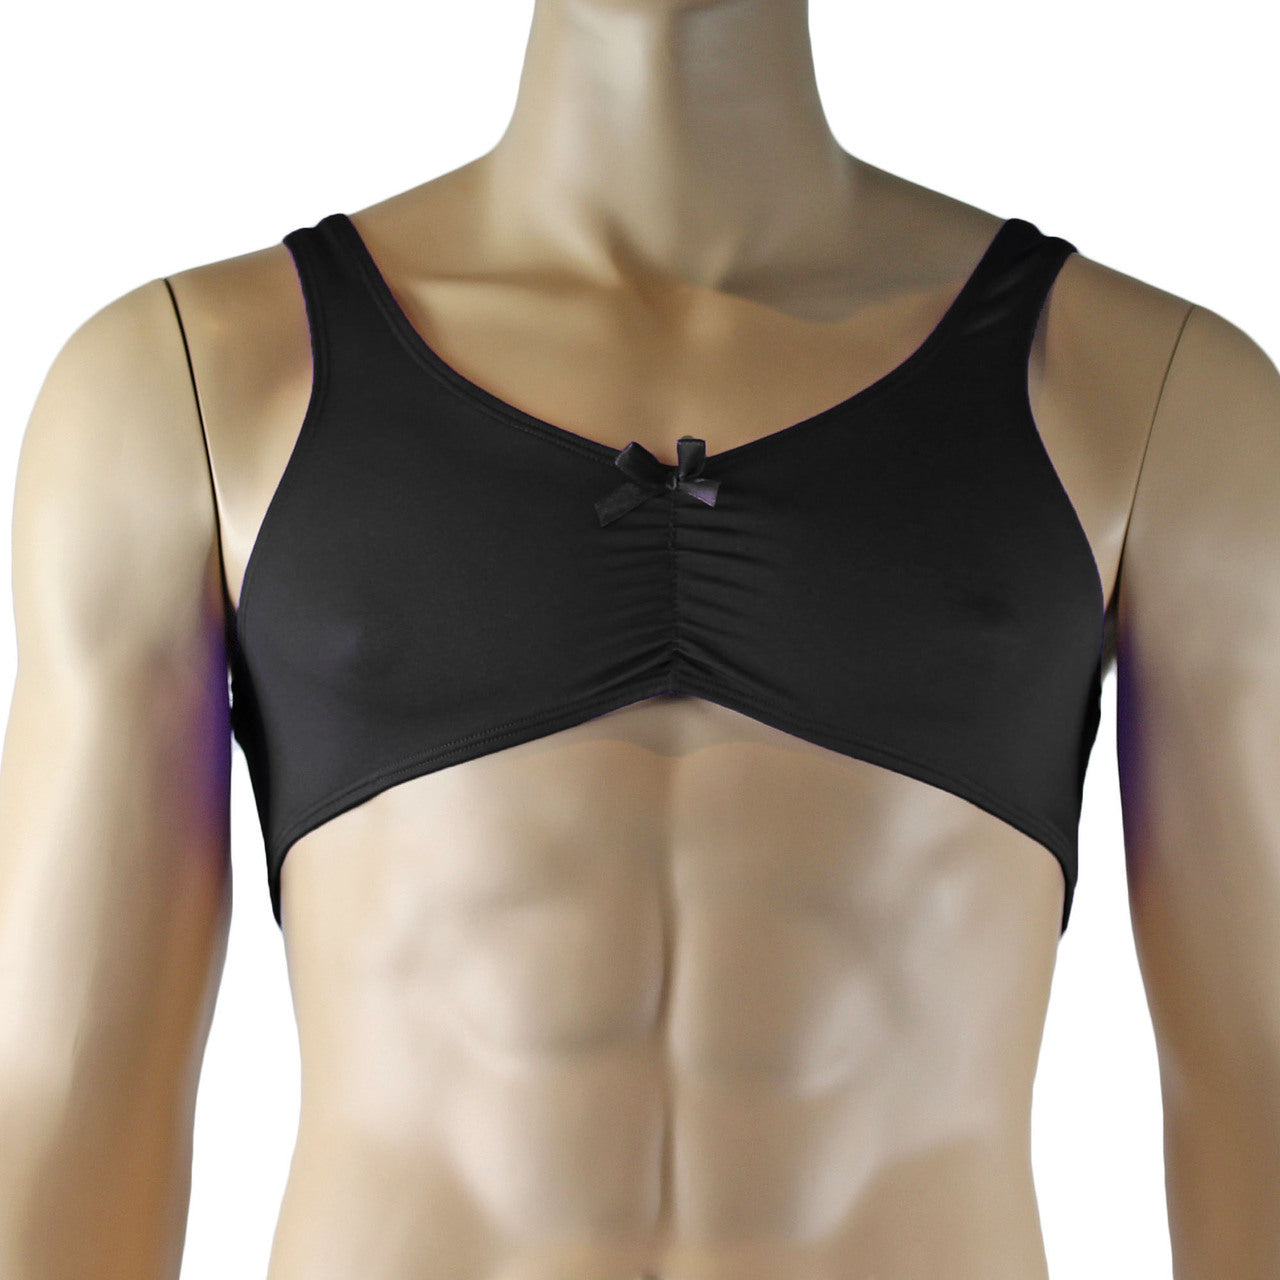 Male Angel Stretch Spandex Bra Top & Matching Thong with Bow Black